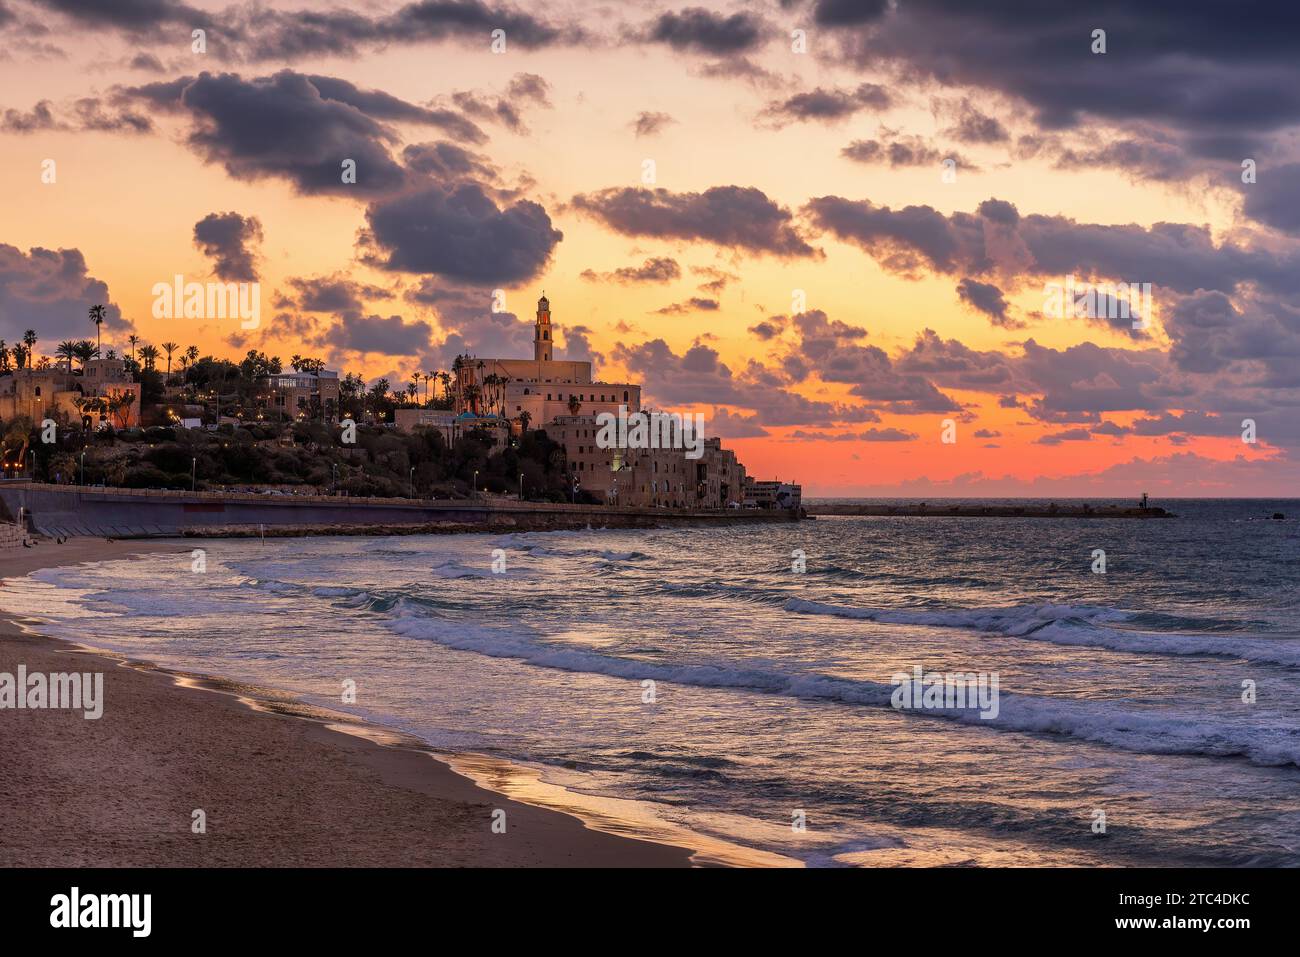 Old town of Jaffa over the sand beach bay on sunset, Tel Aviv, Israel. Stock Photo